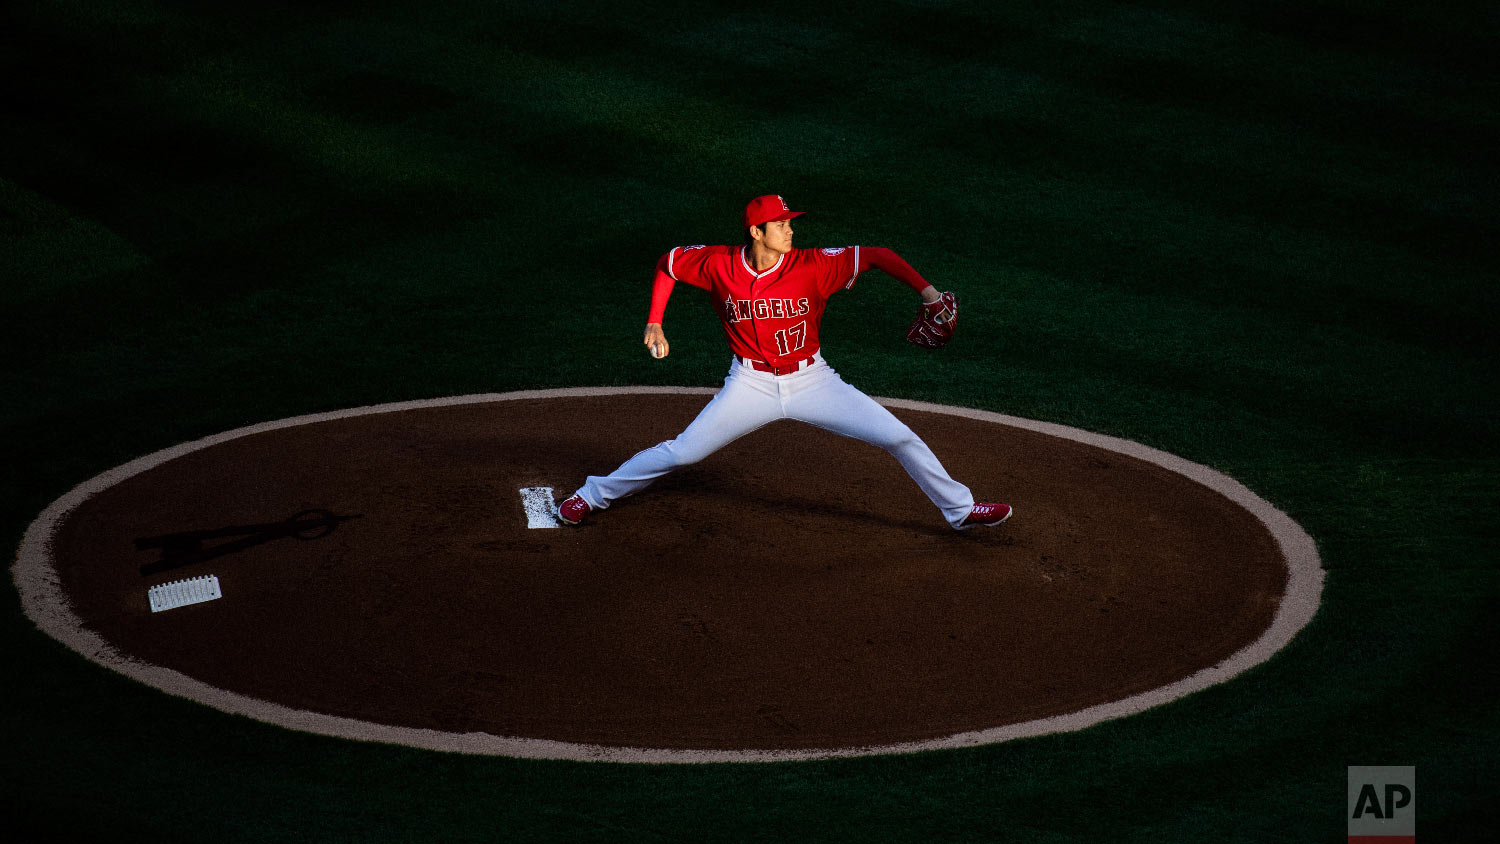  Los Angeles Angels starting pitcher Shohei Ohtani winds up during the first inning of the team's baseball game against the Kansas City Royals in Anaheim, Calif., on June 6, 2018. (AP Photo/Kyusung Gong) 